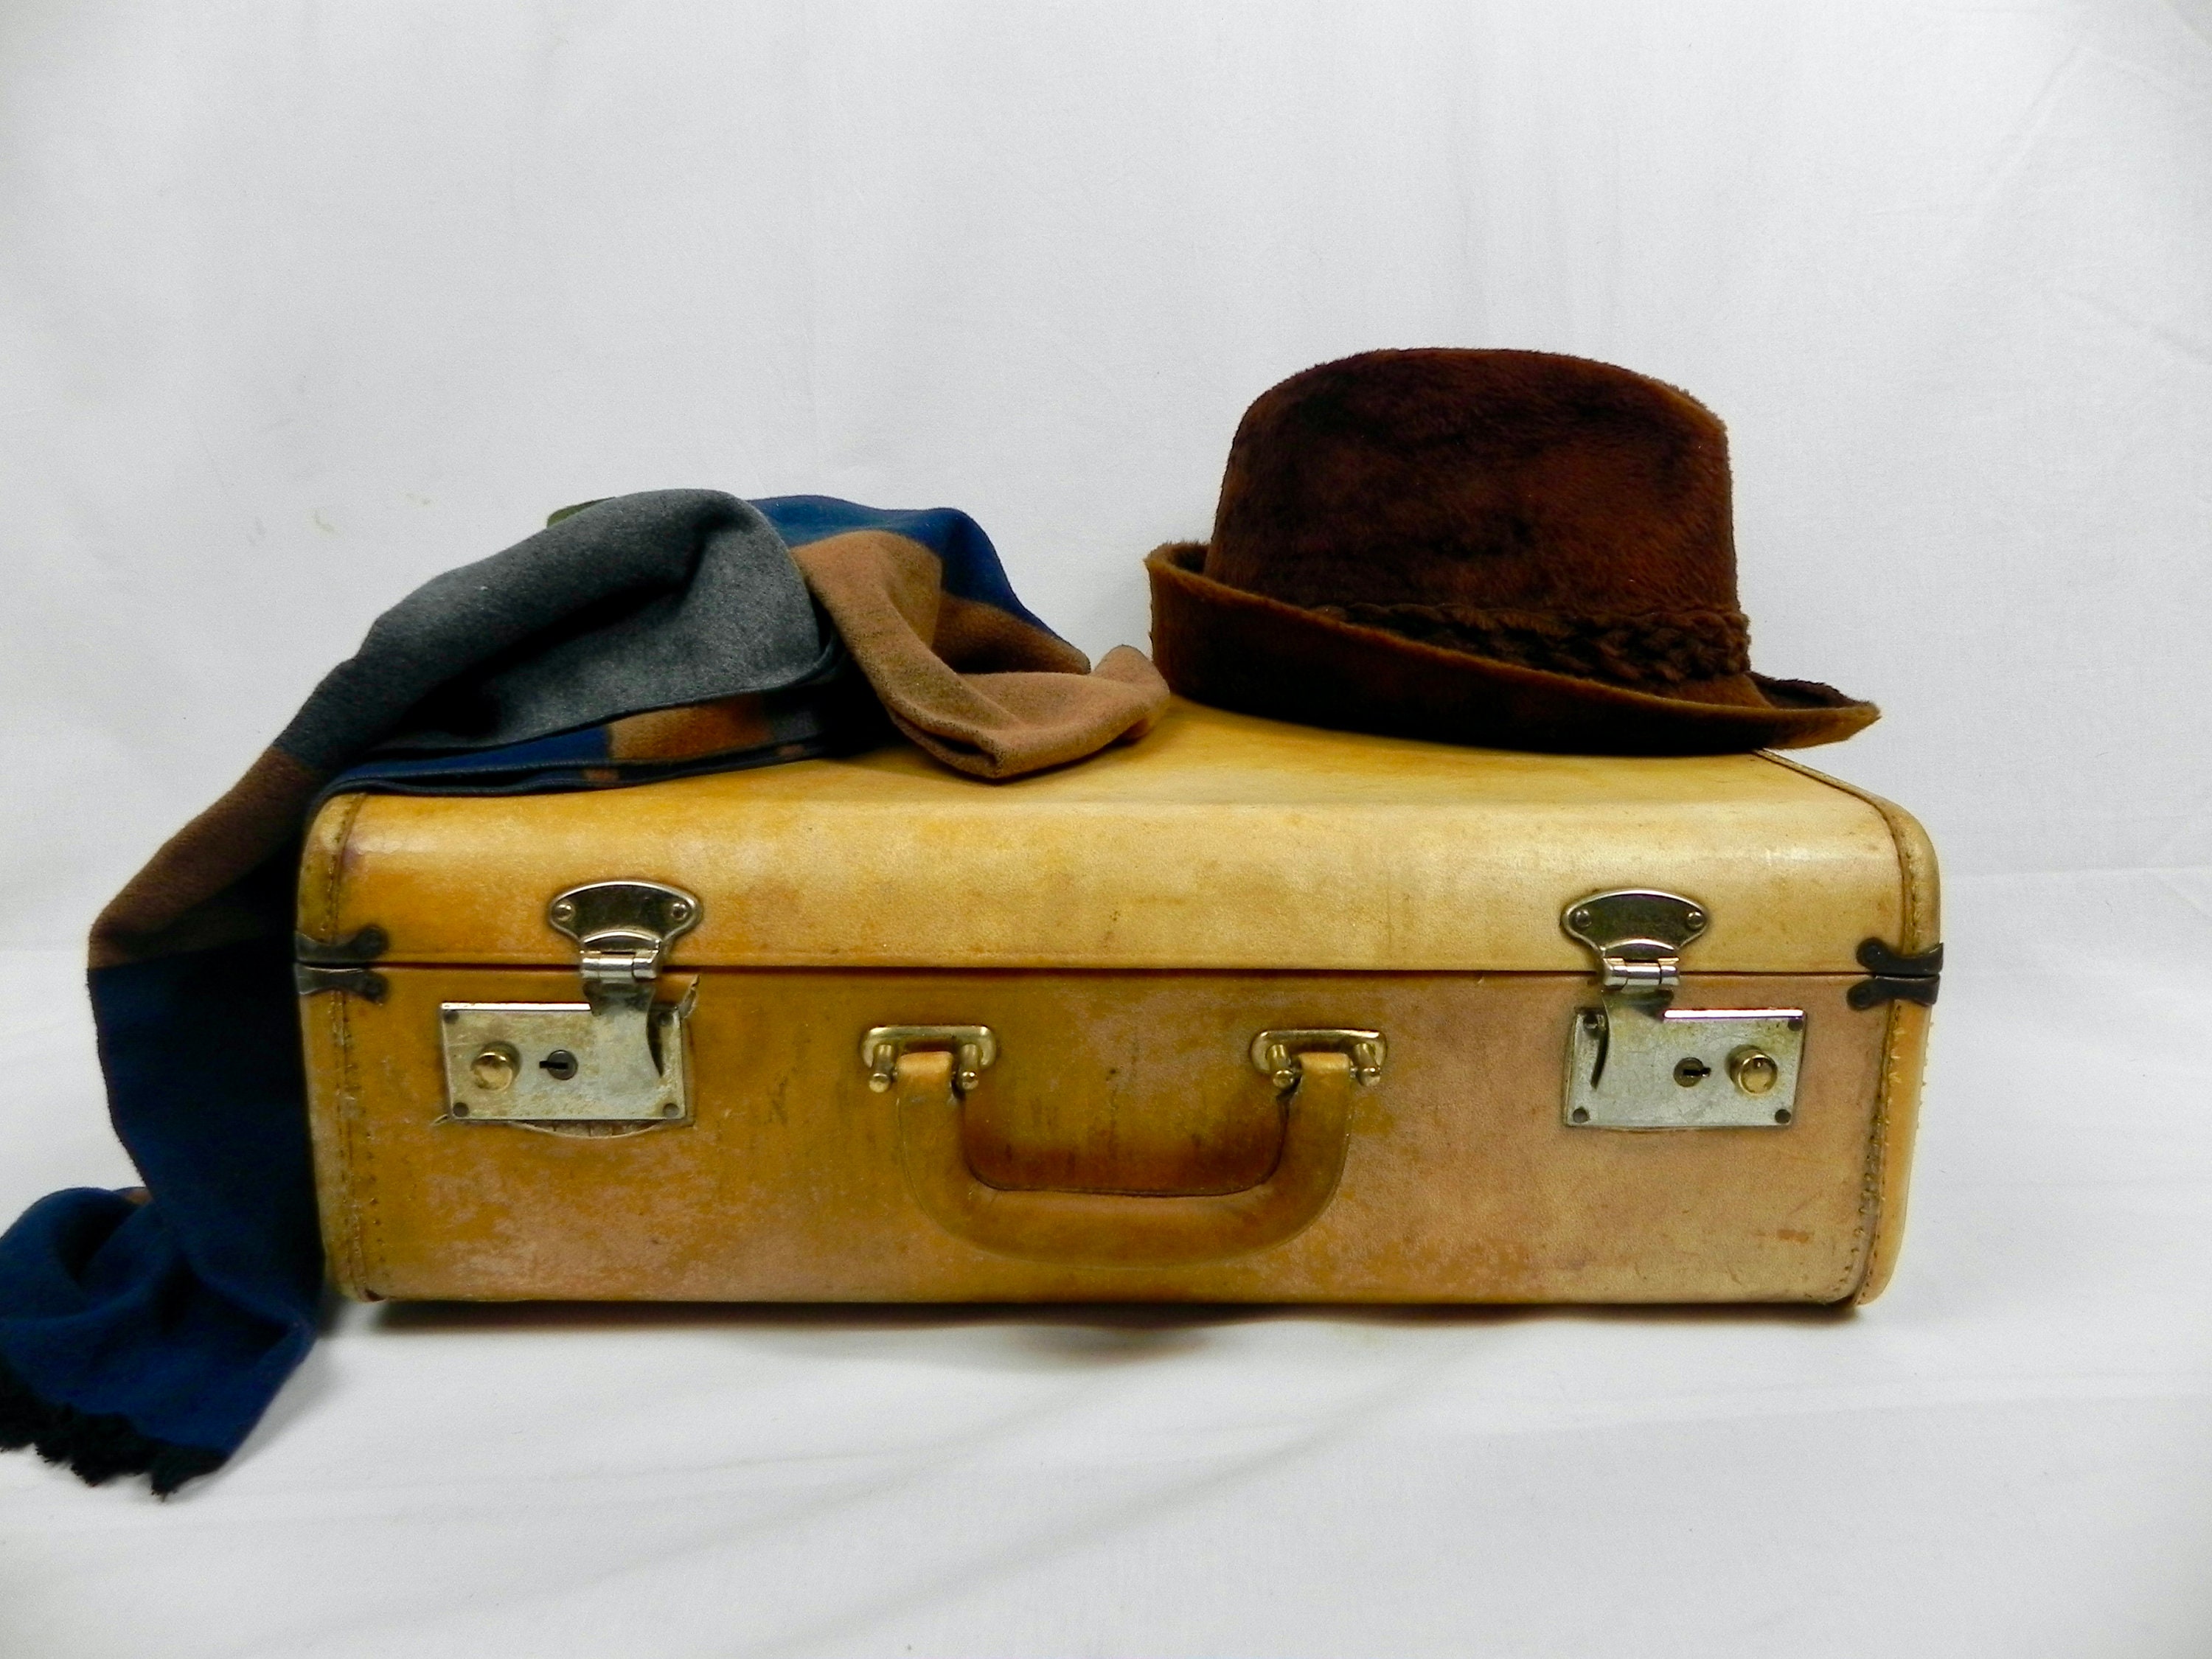 19th Century Victorian Crocodile Skin Suitcase With A, 60% OFF